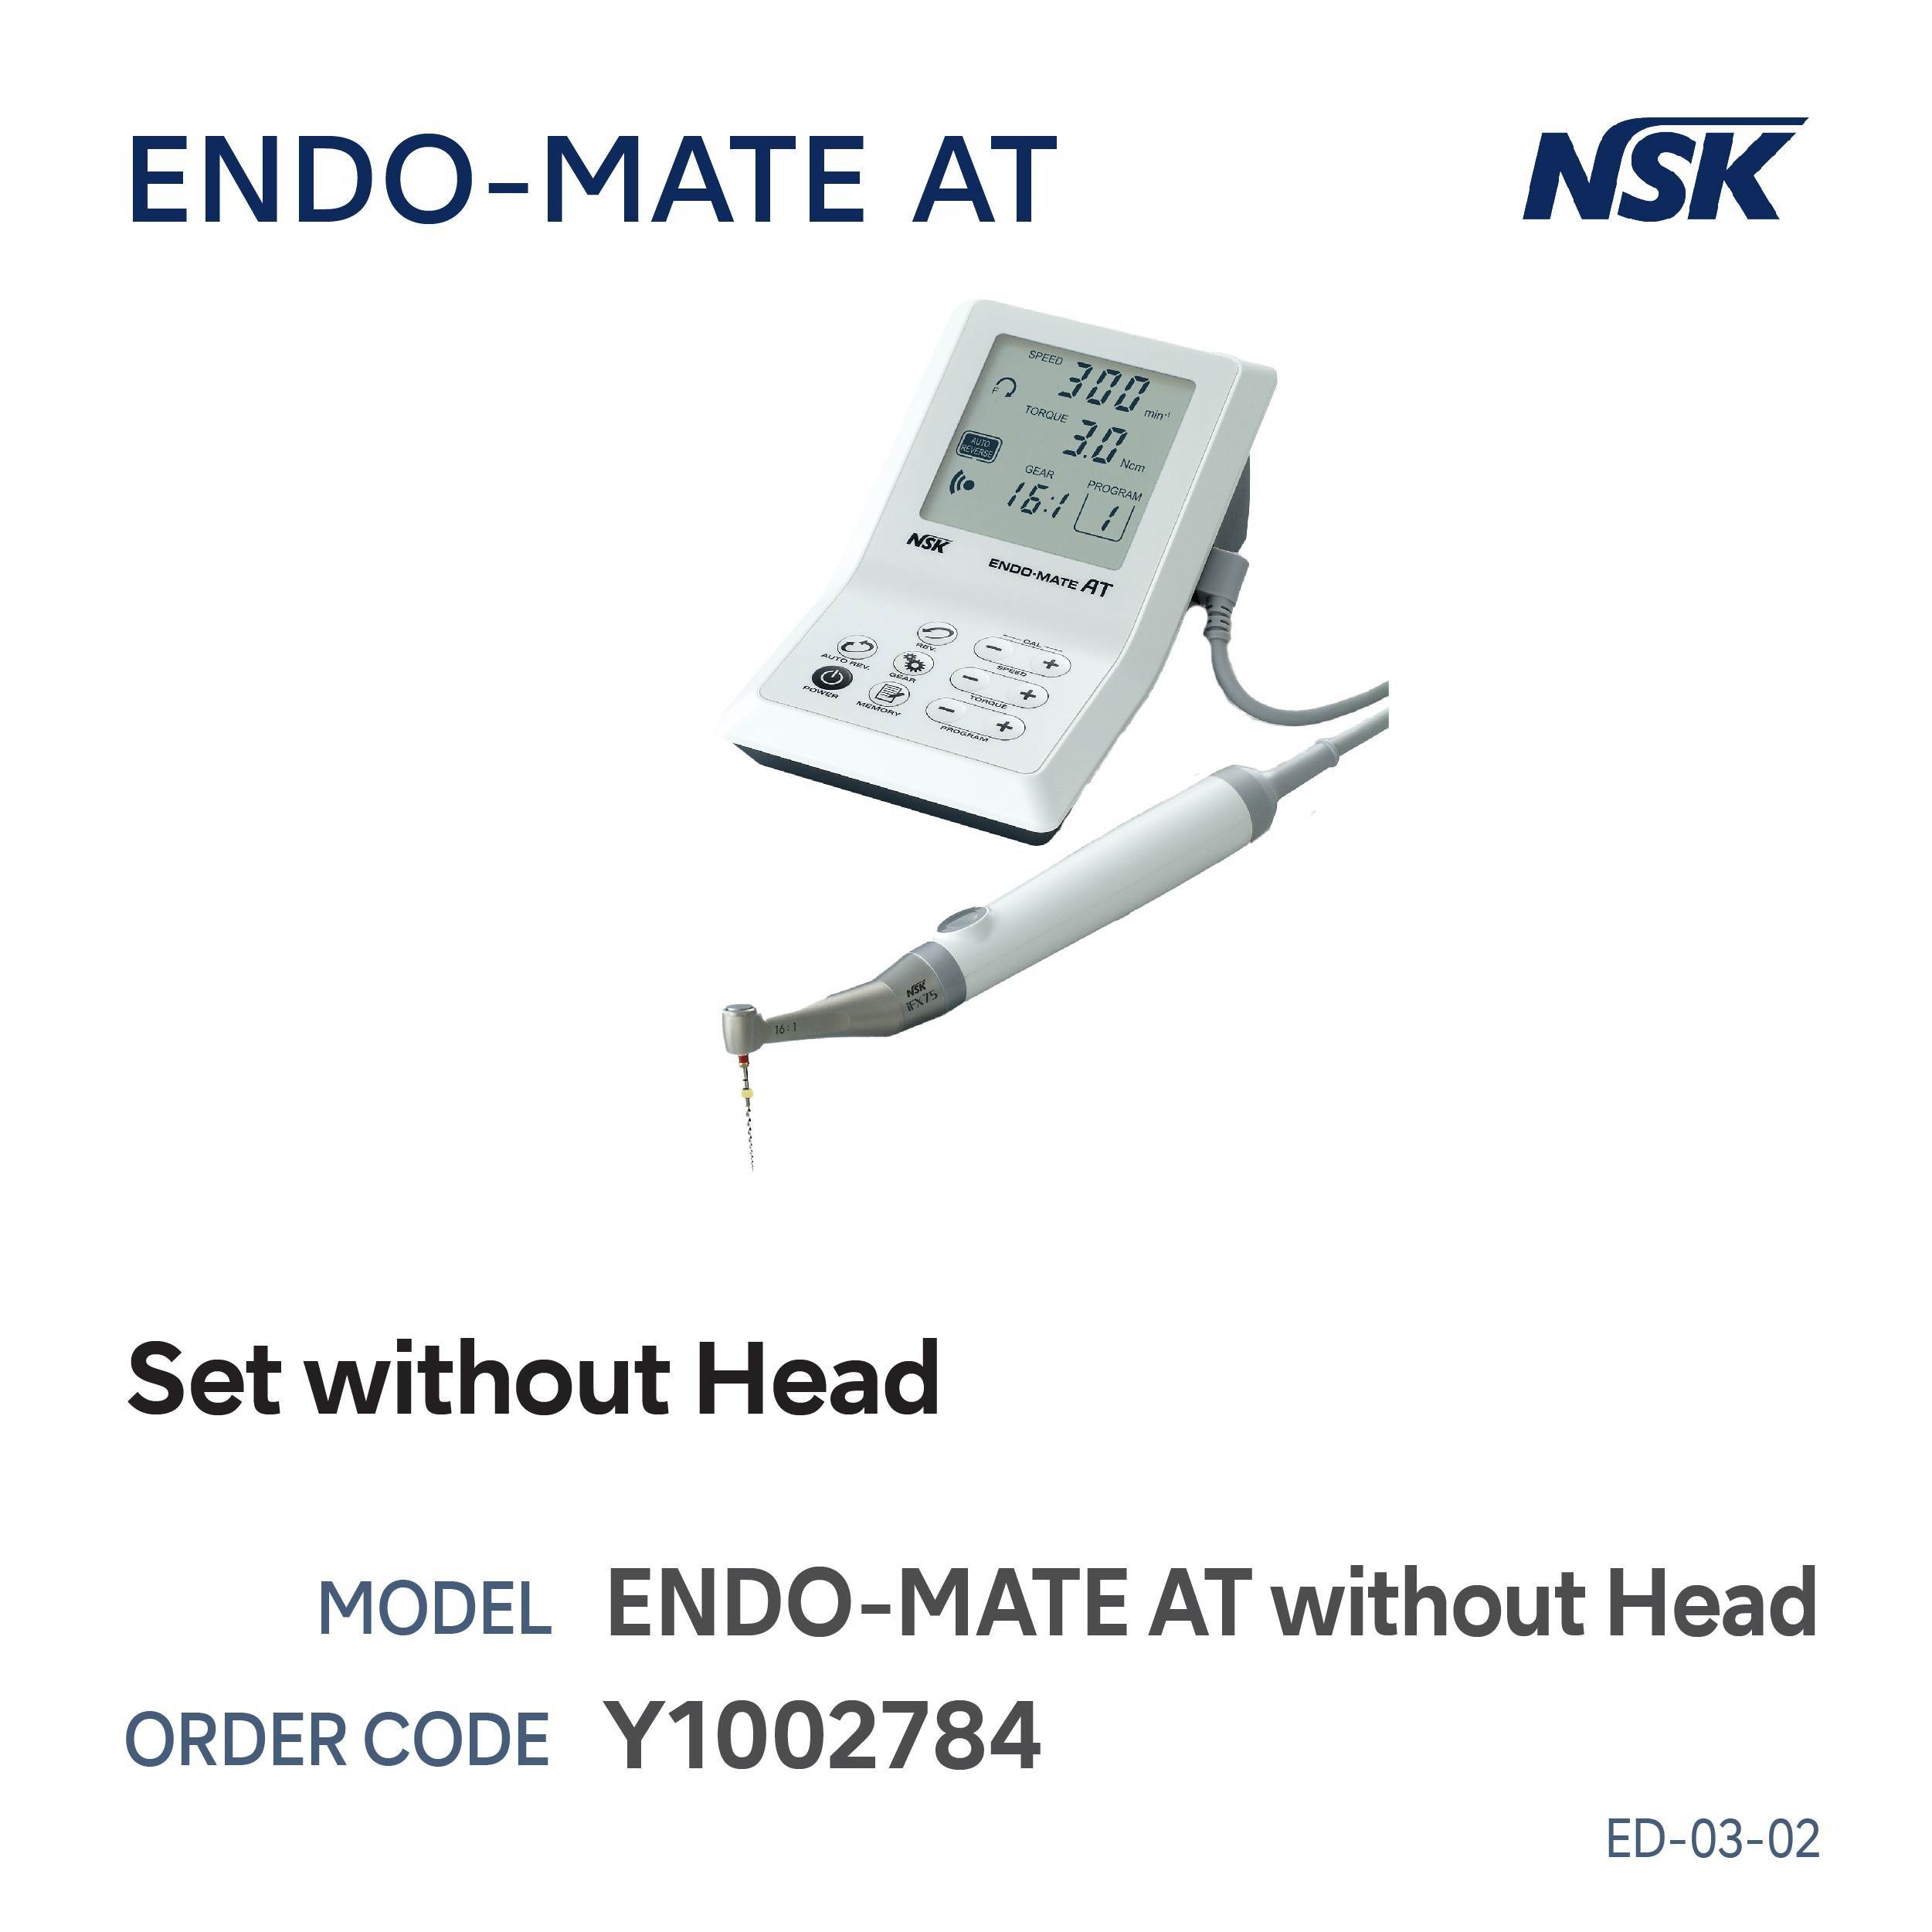 ENDOMATE AT WITHOUT HEAD